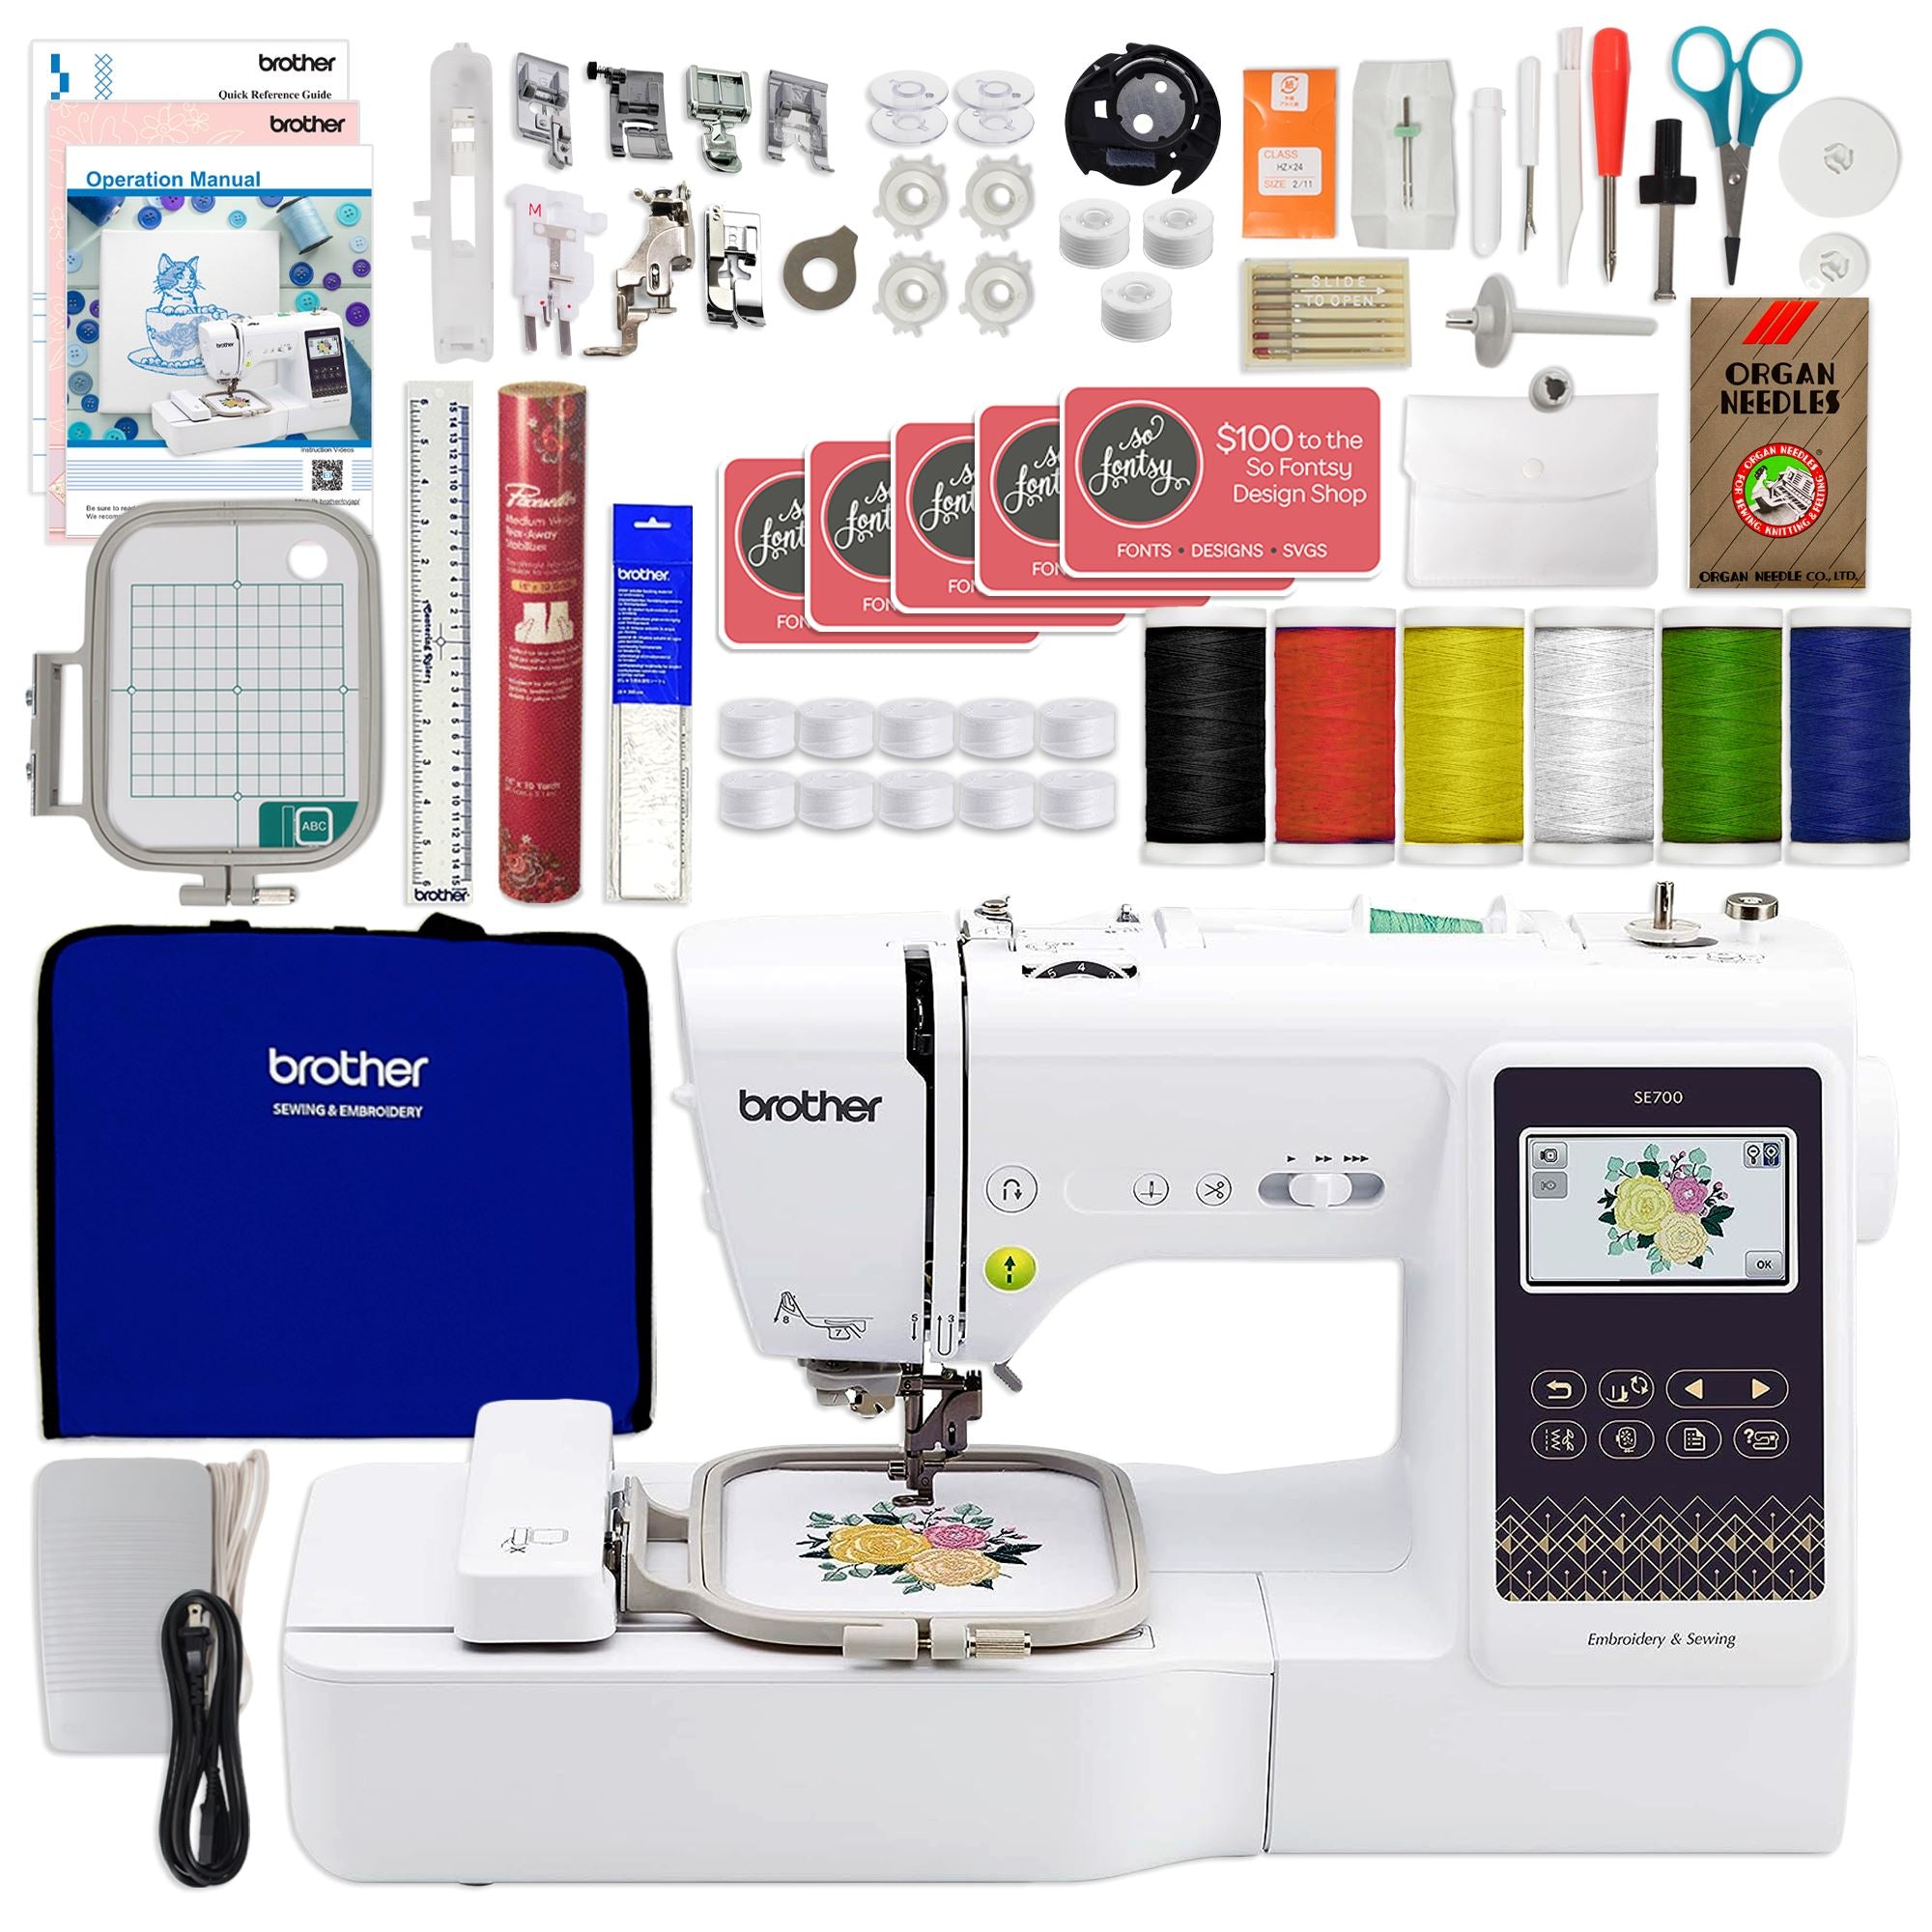 Sewing & Embroidery Combo Machines - Page 2 of 3 - Moore's Sewing